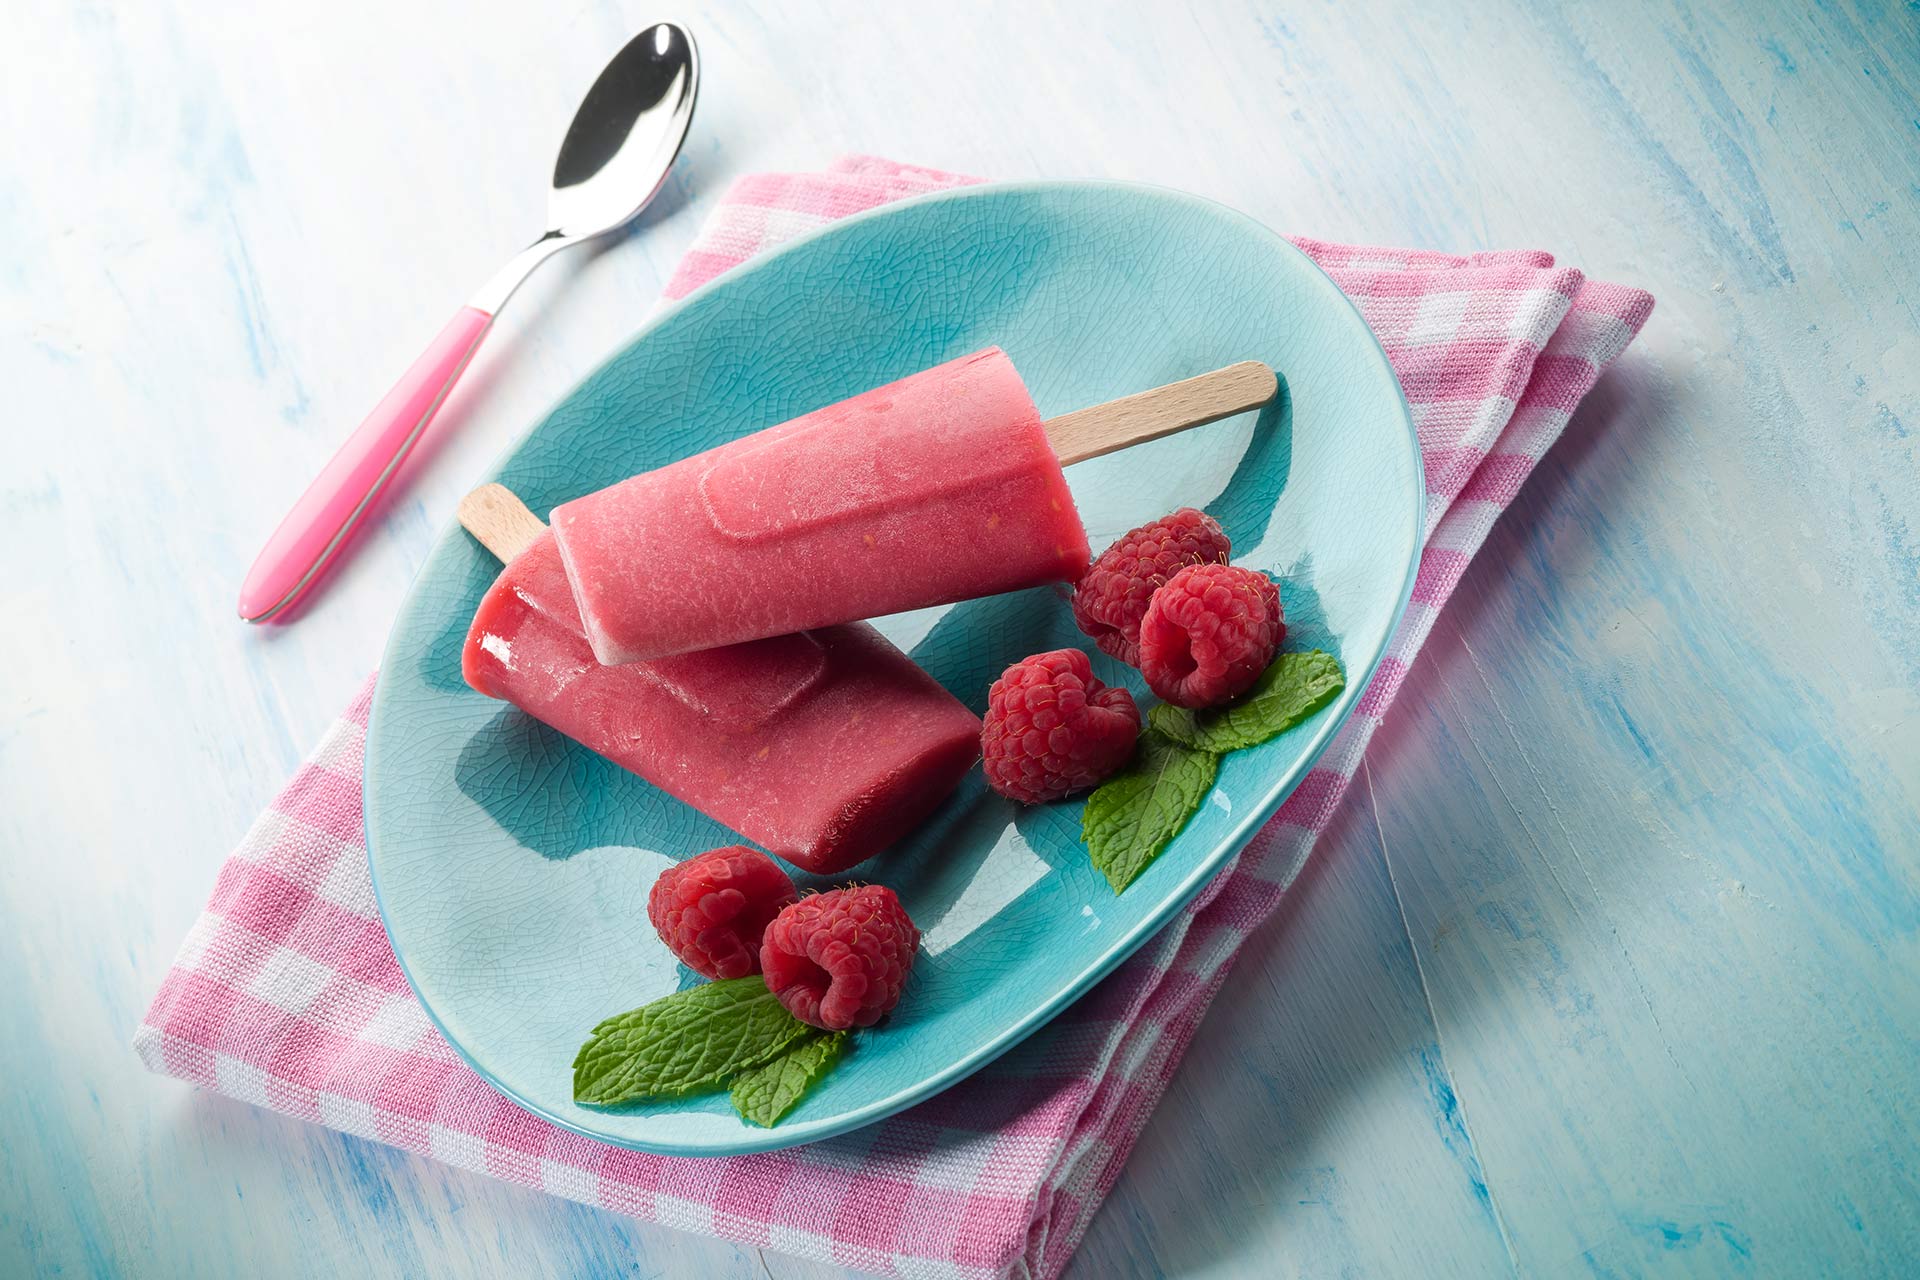 THE LITTLE THING ABOUT THE RASPBERRY POPSICLE